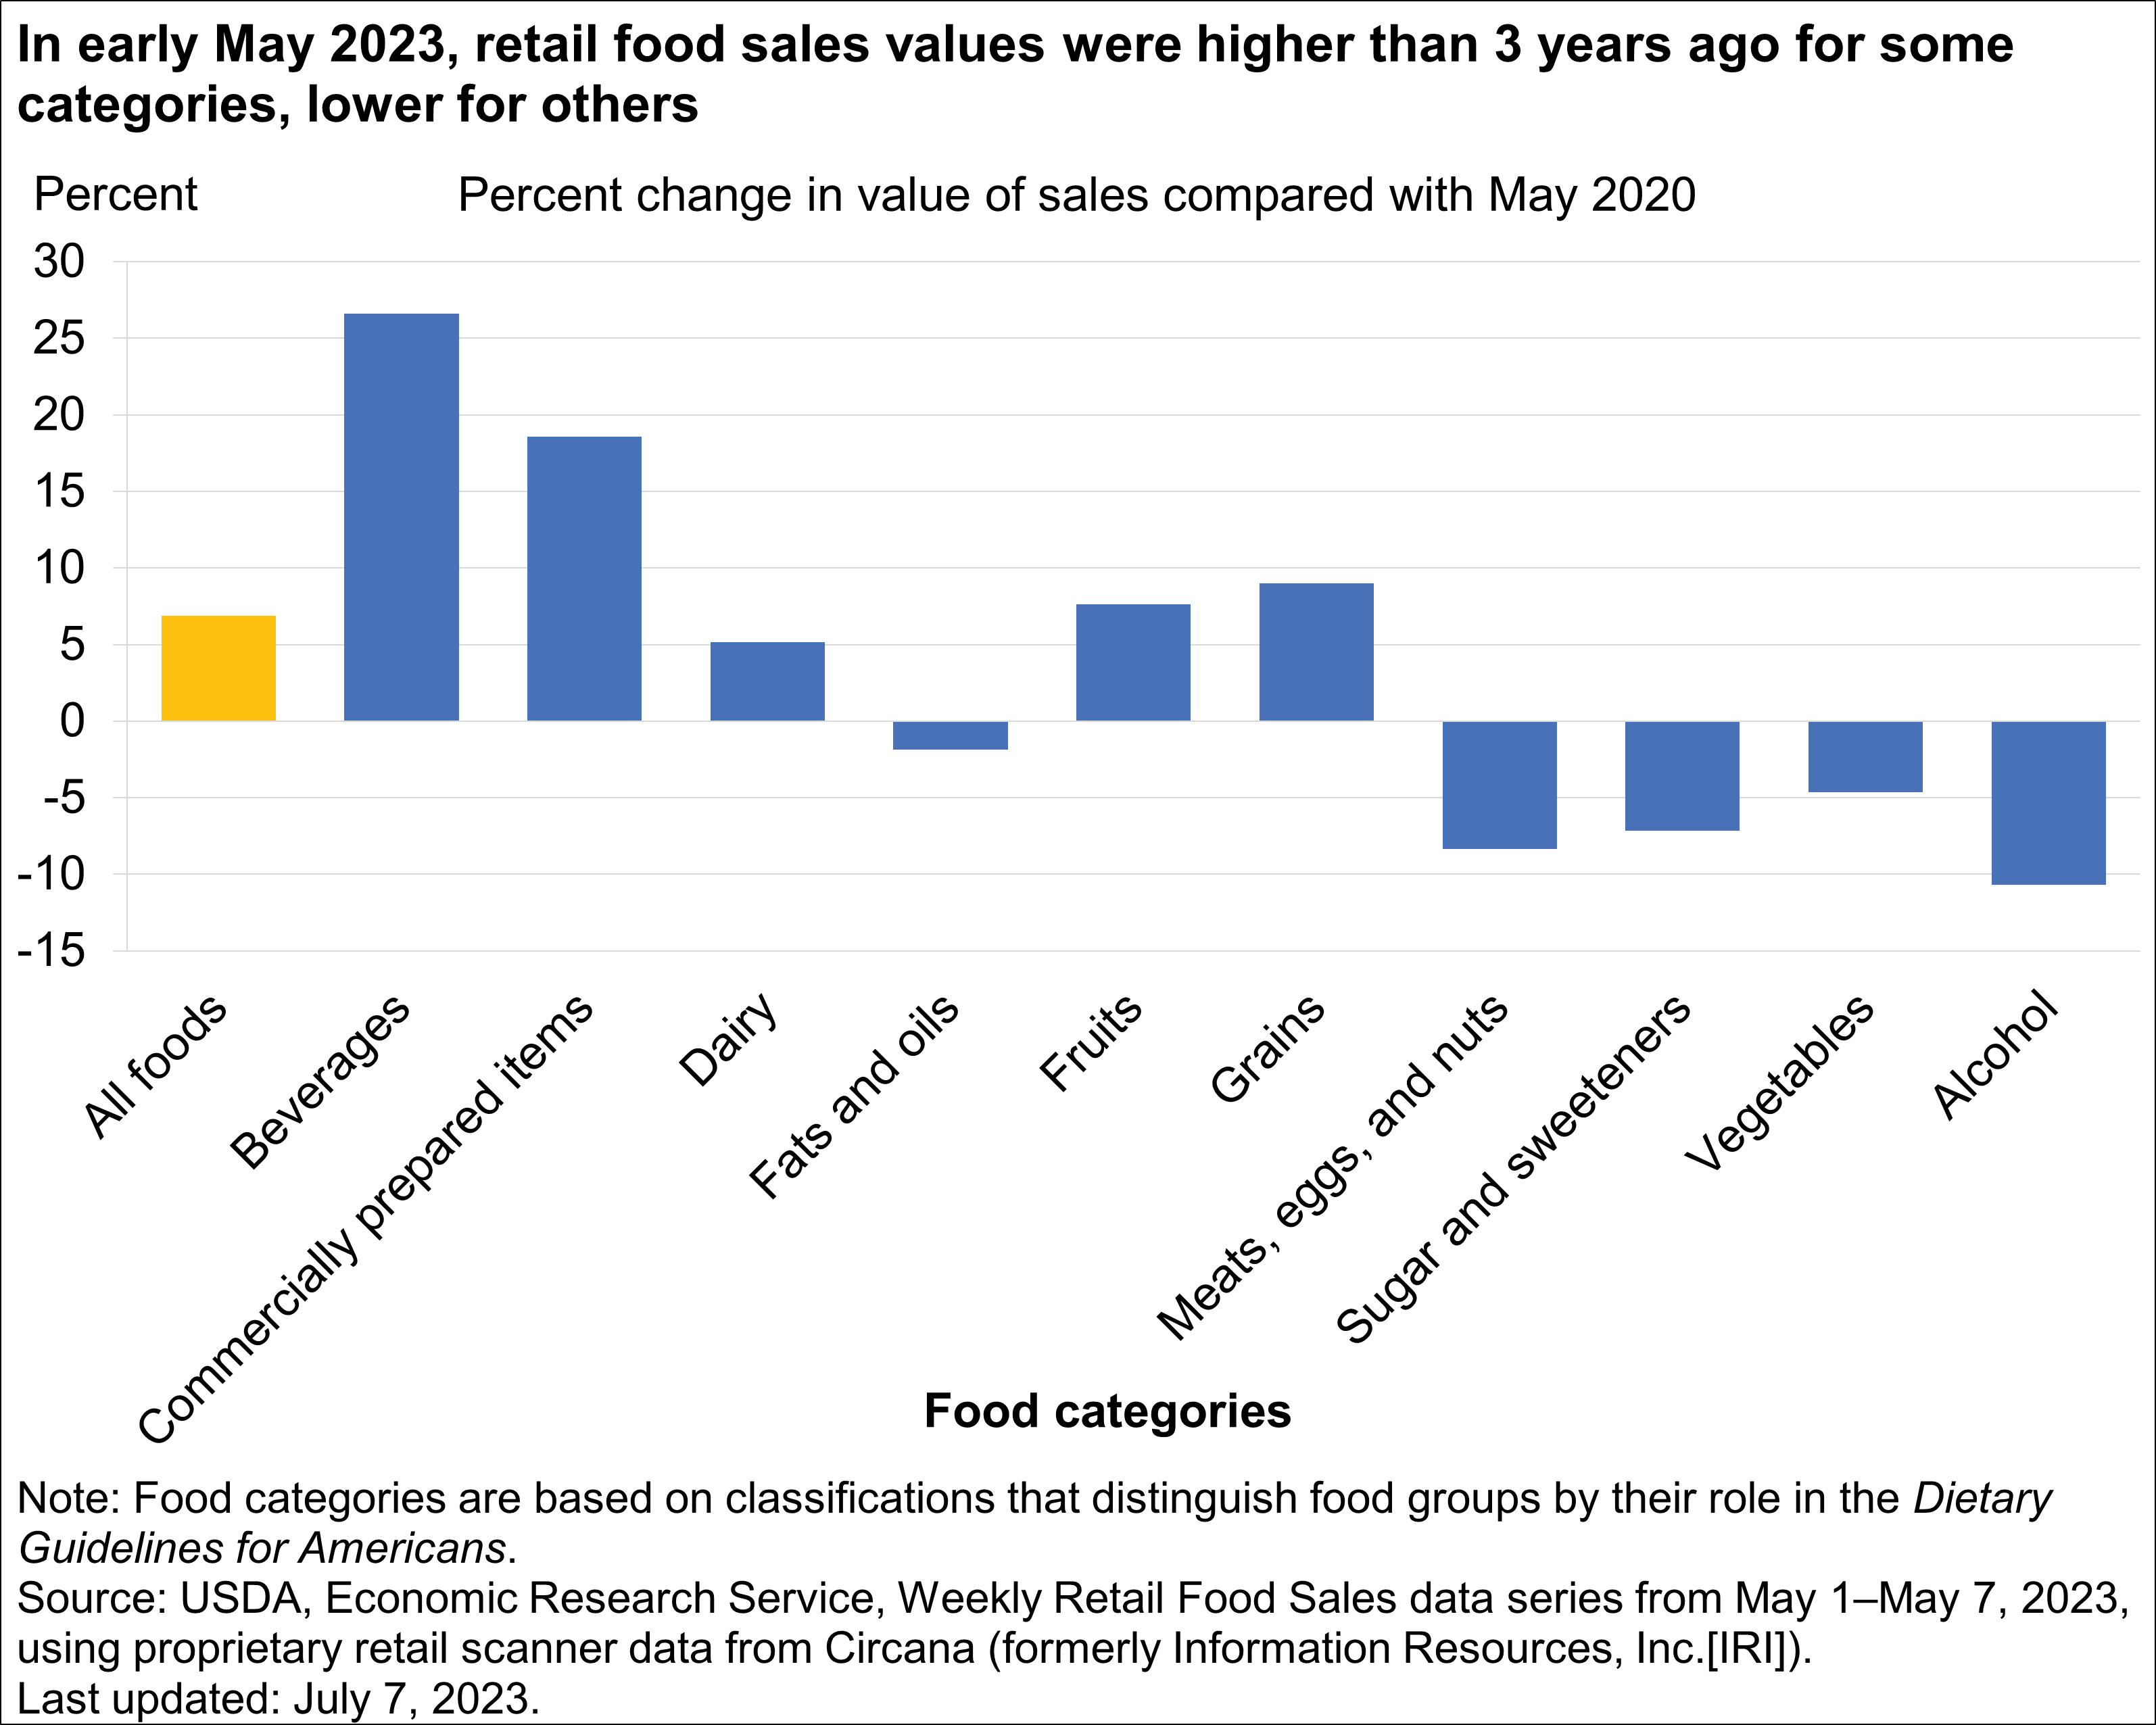 https://www.ers.usda.gov/webdocs/charts/101351/Food_and_Consumers_Figure_3-2.png?v=4319.5